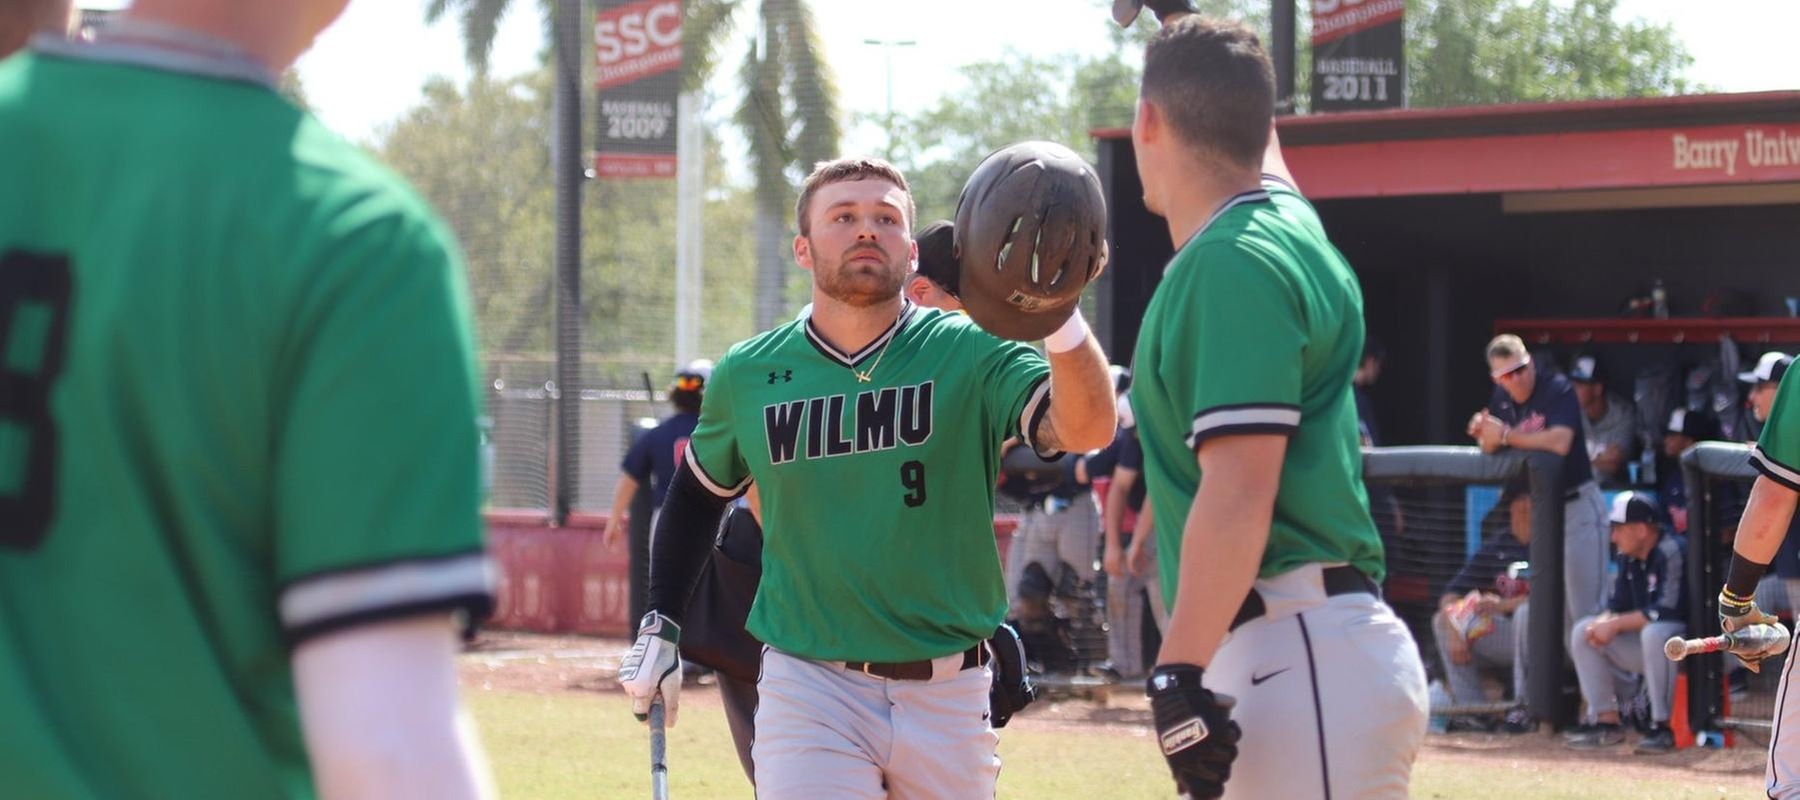 Copyright 2019; Wilmington University. All rights reserved. Photo by Heather Leslie. March 9, 2019 vs. Queens at Barry University.